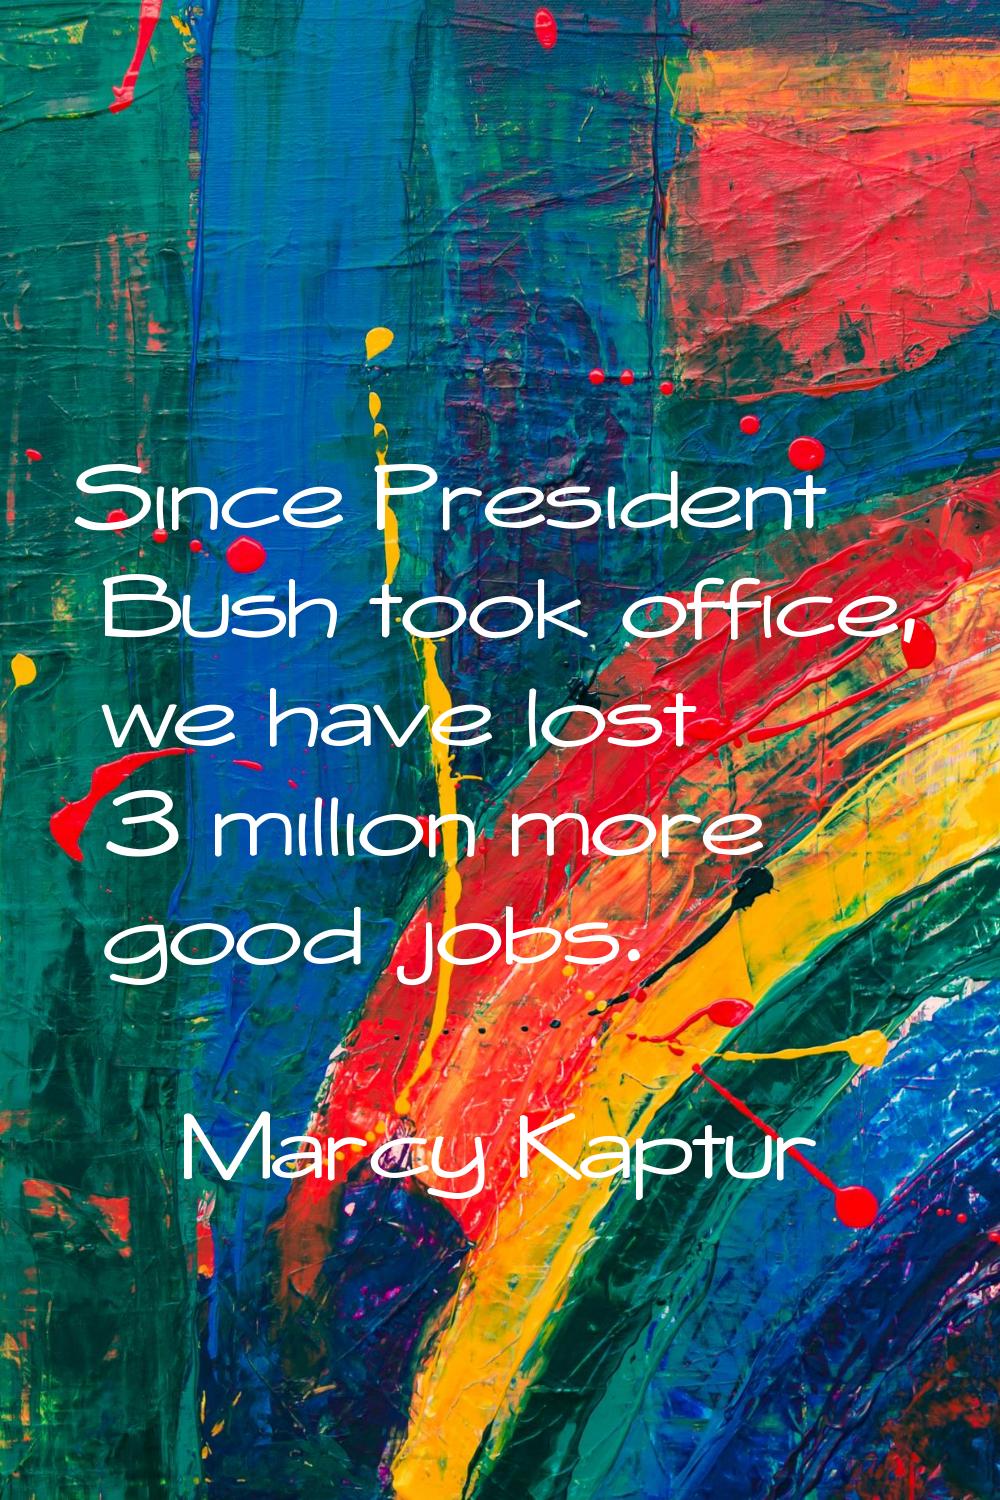 Since President Bush took office, we have lost 3 million more good jobs.